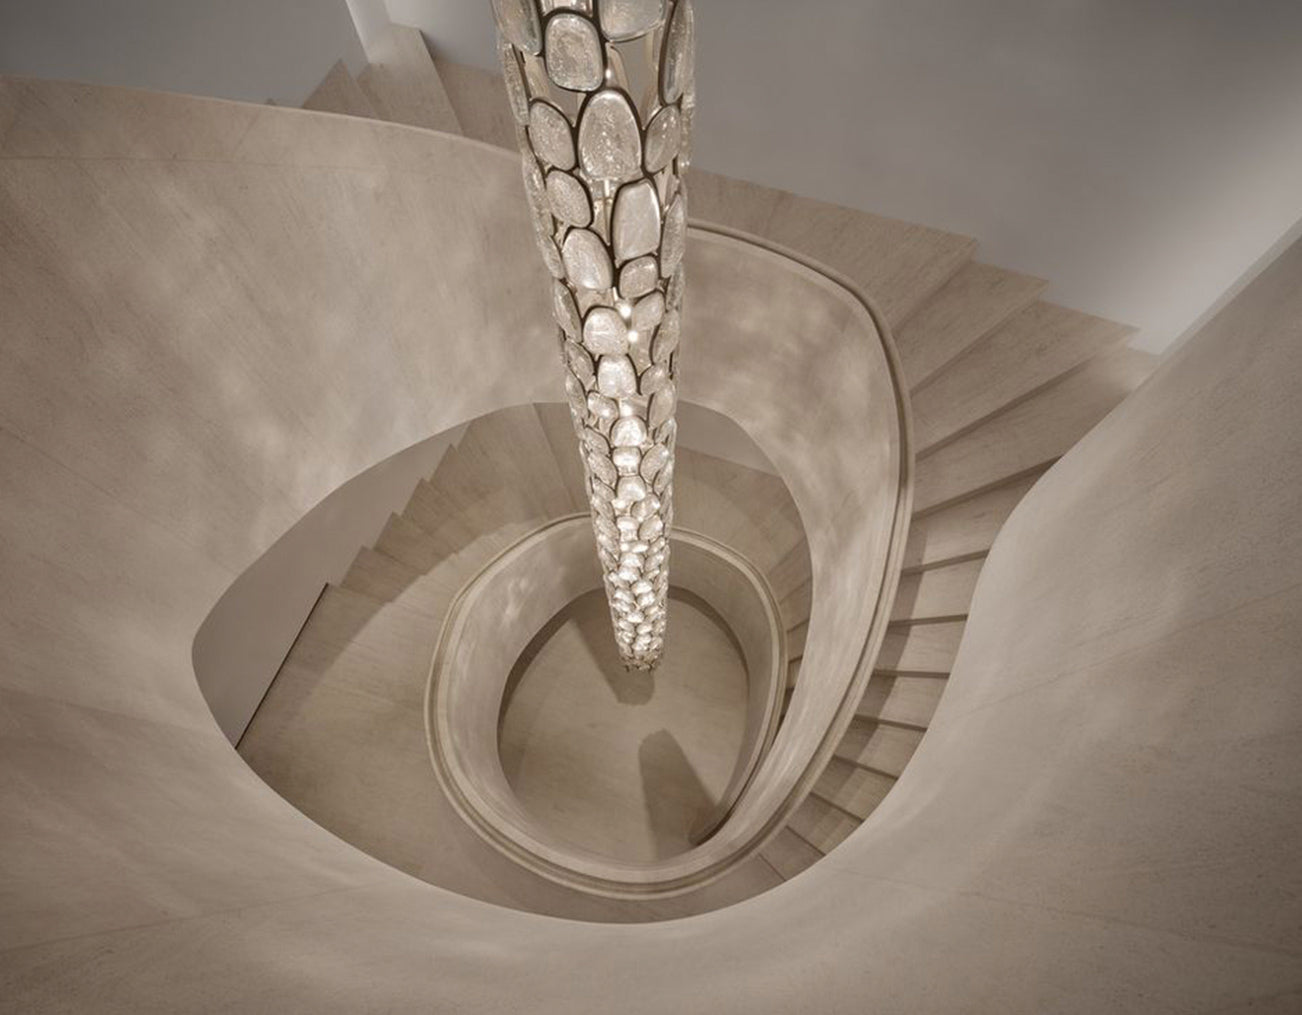 5 Heliocoidal staircases that we love